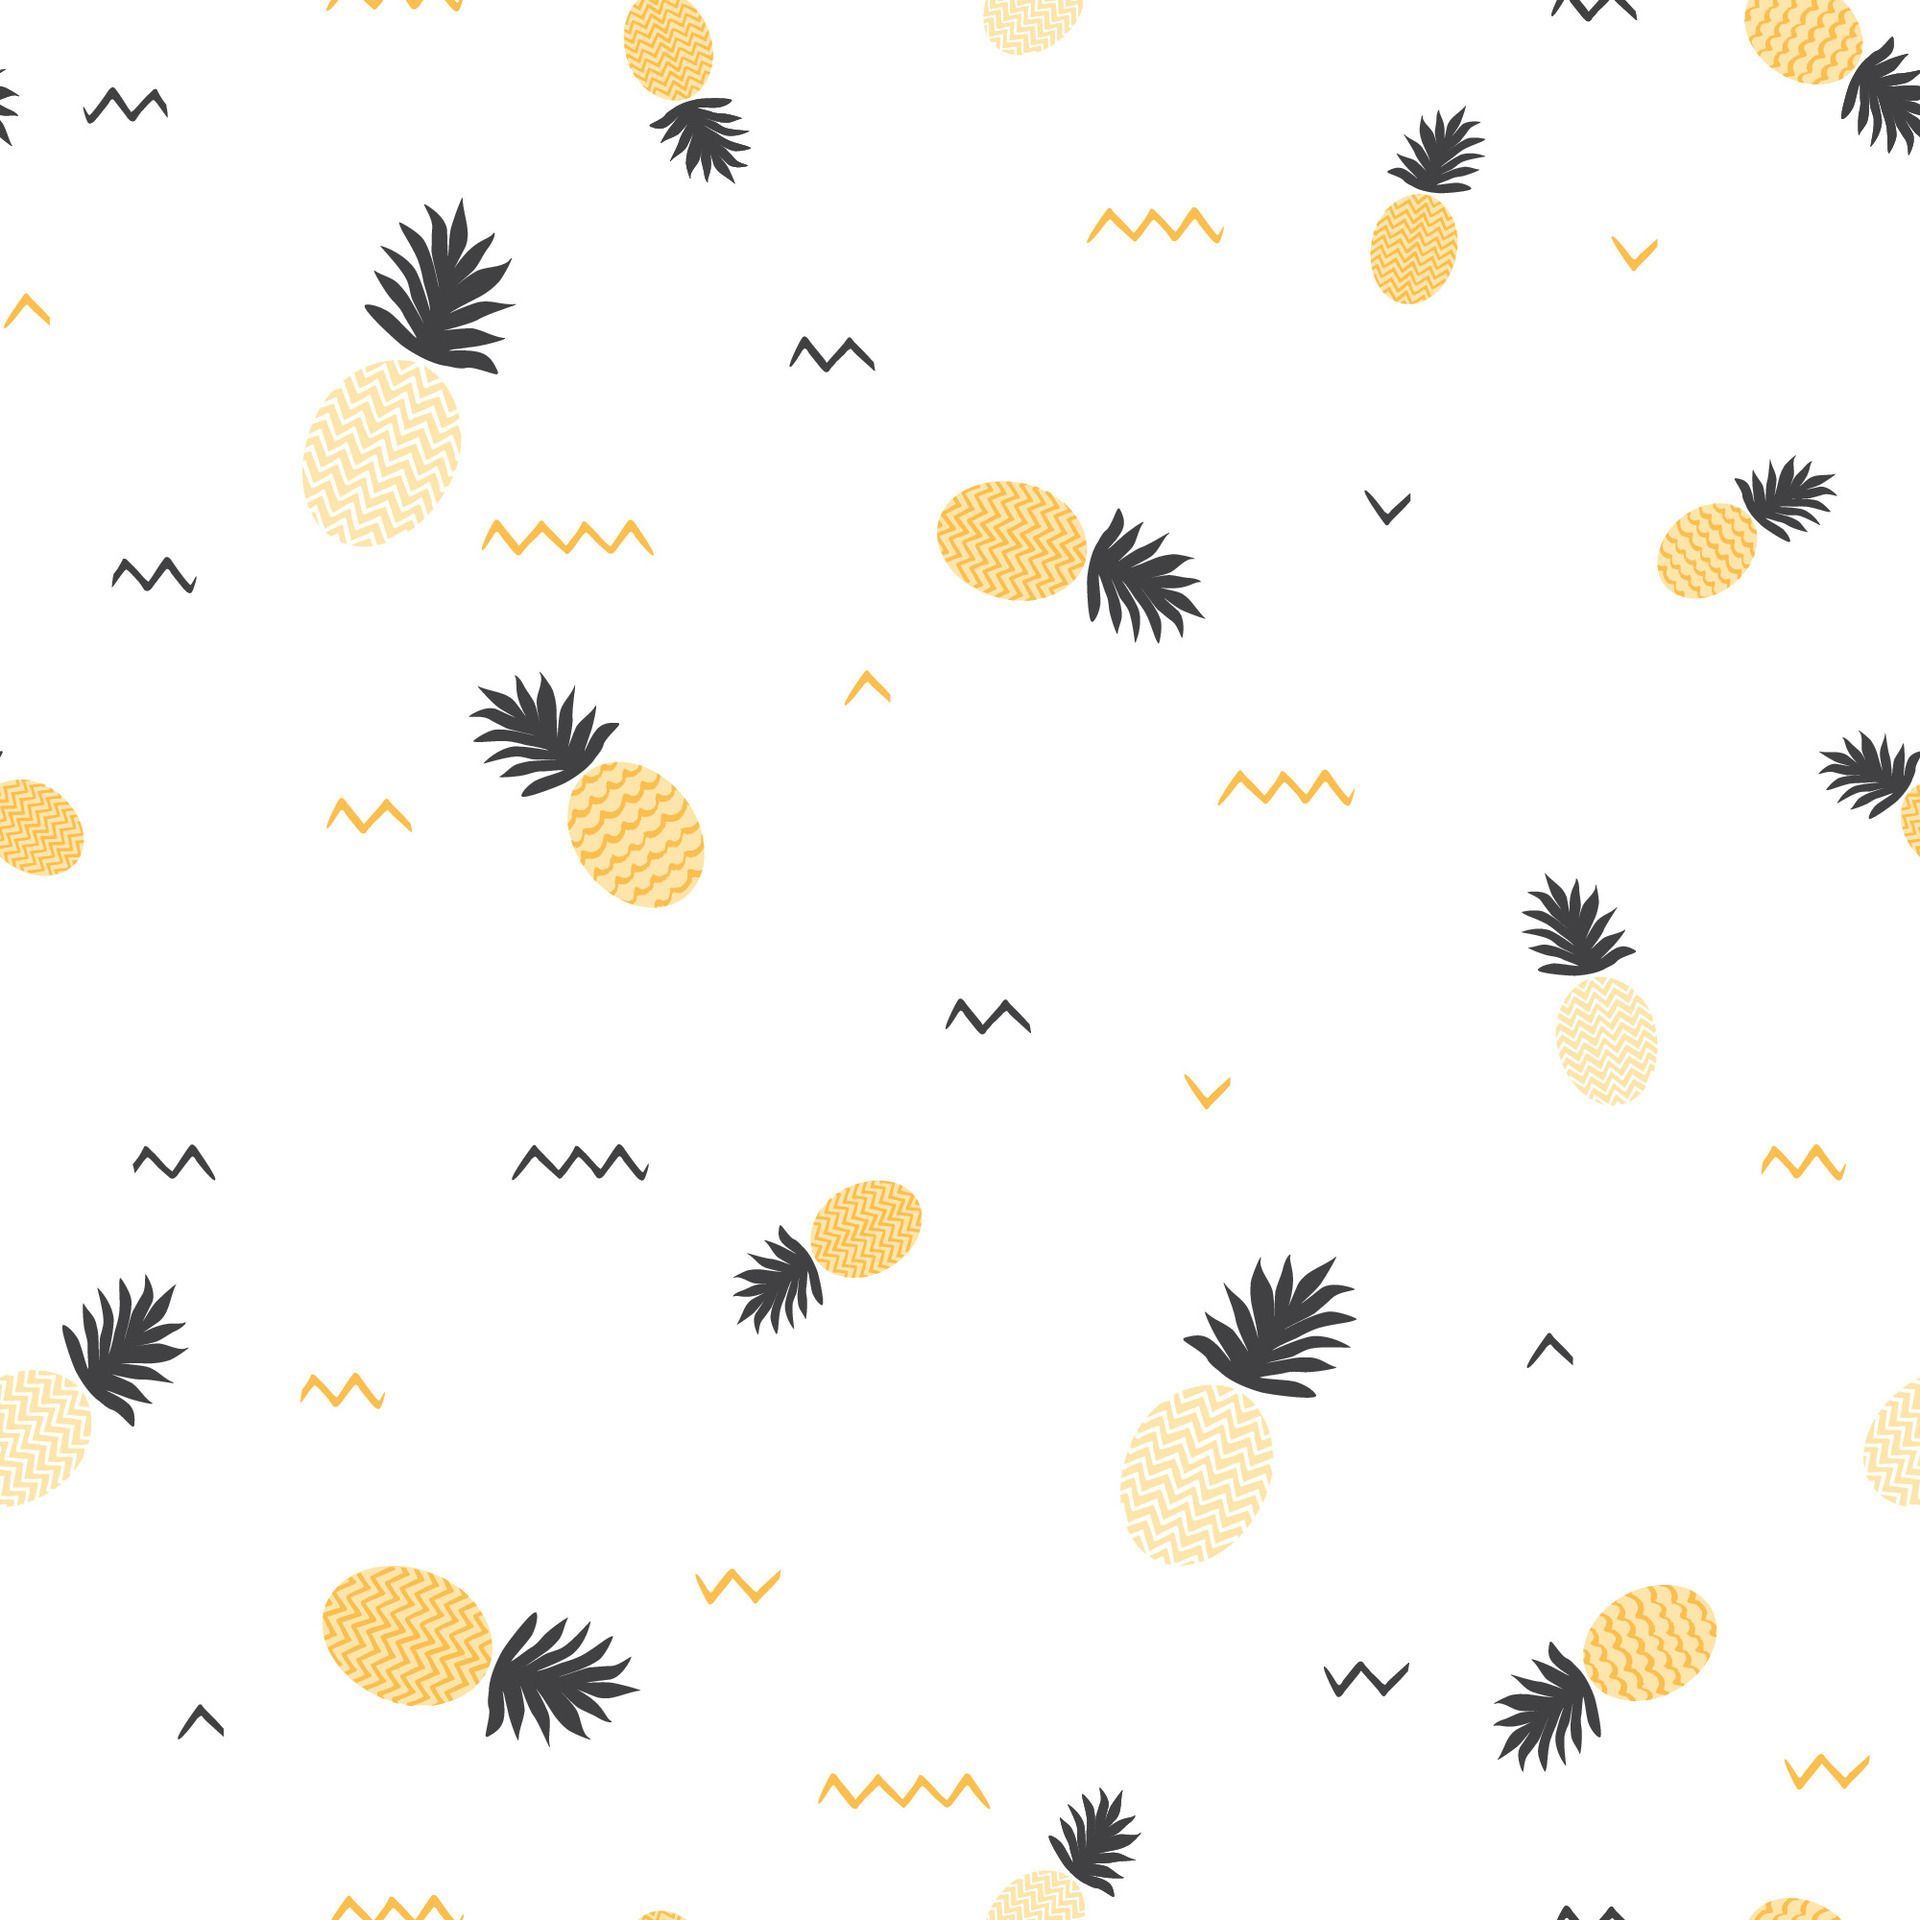 Pineapple simple vector seamles background. Textile fabric ananas in yellow and grey colors. Yellow summer pattern for beach boy girl baby kids cloth design Vacation decorative wallpaper print Vector Art